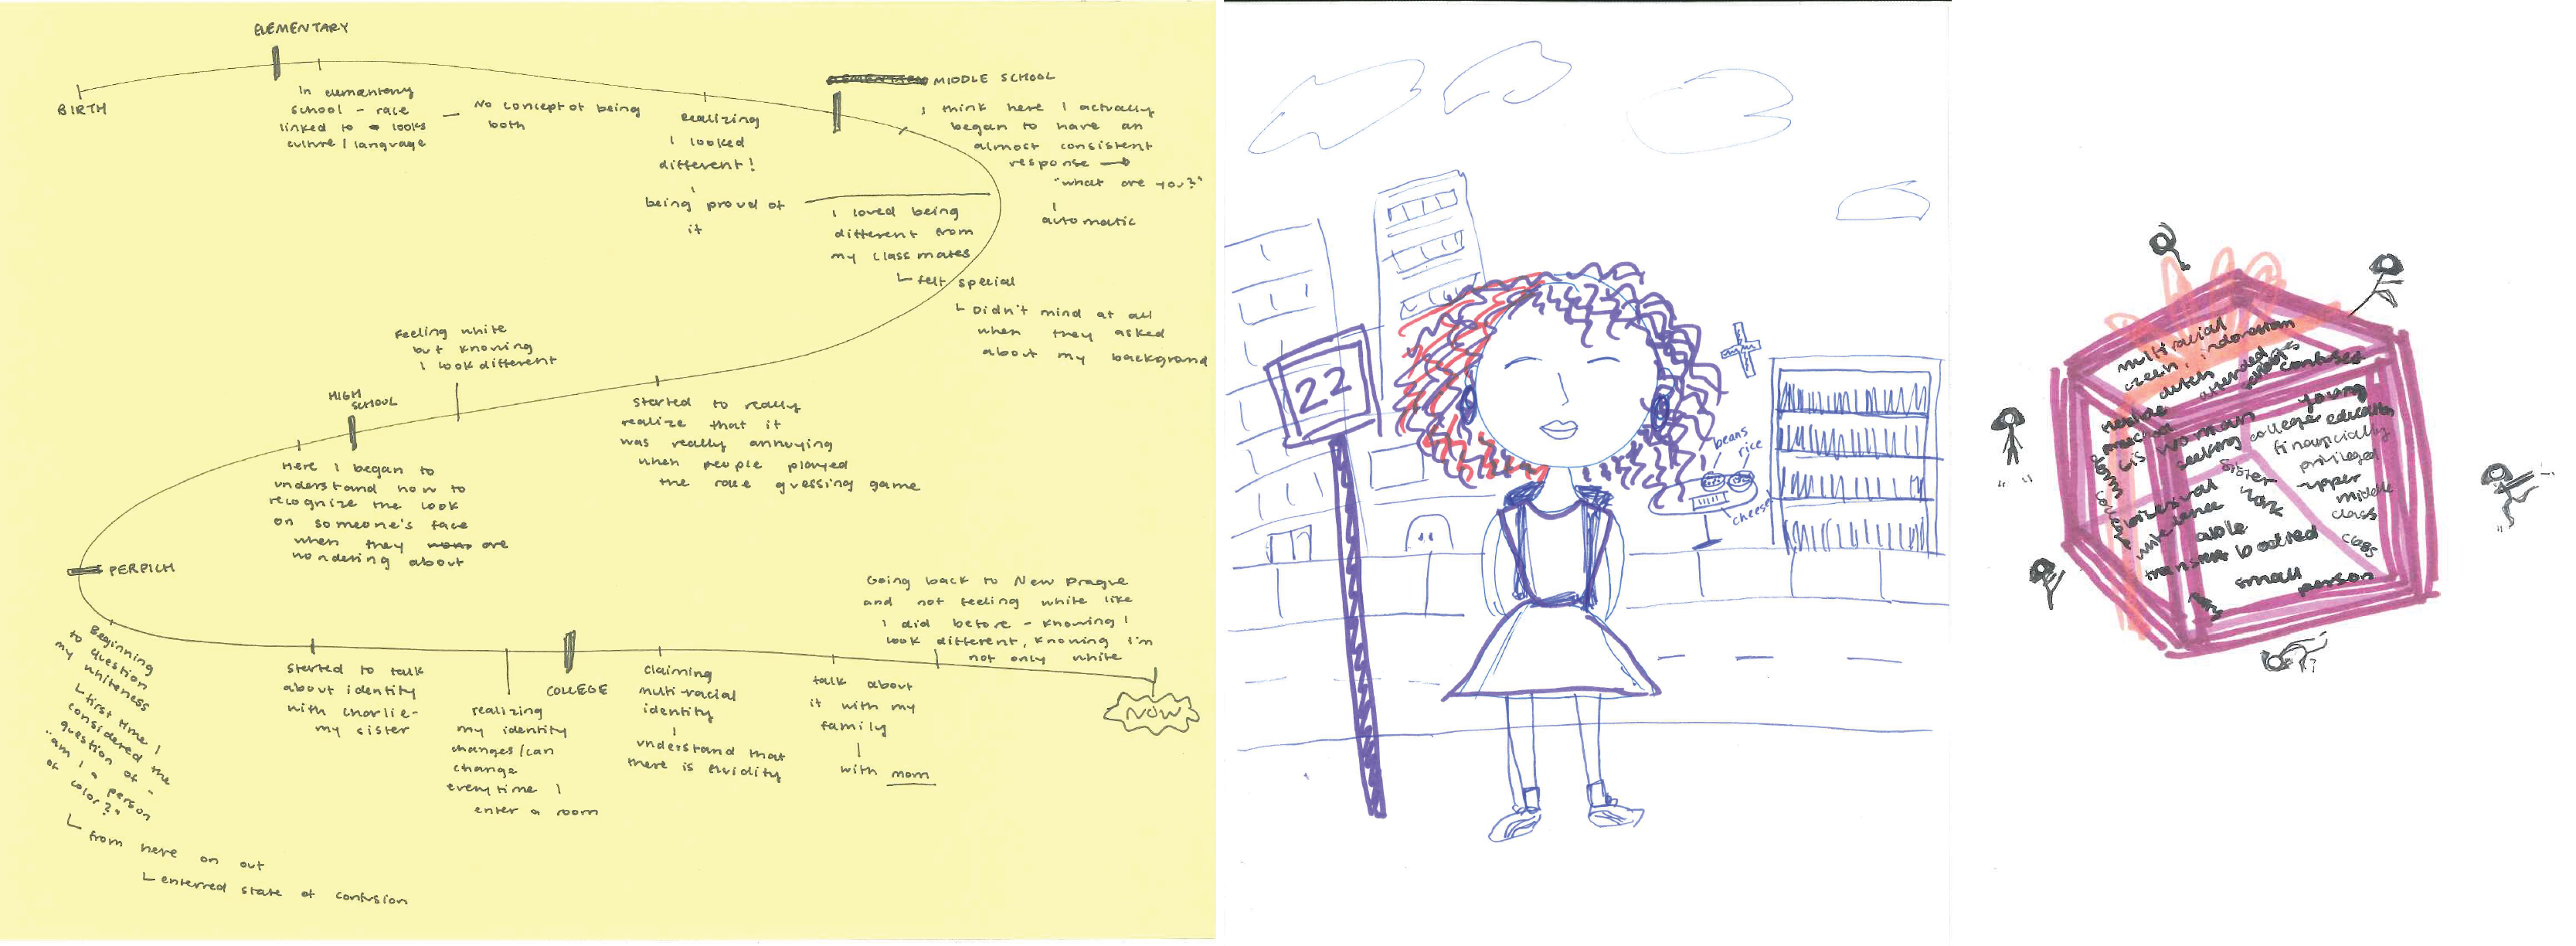 Drawings and notes from a children's study